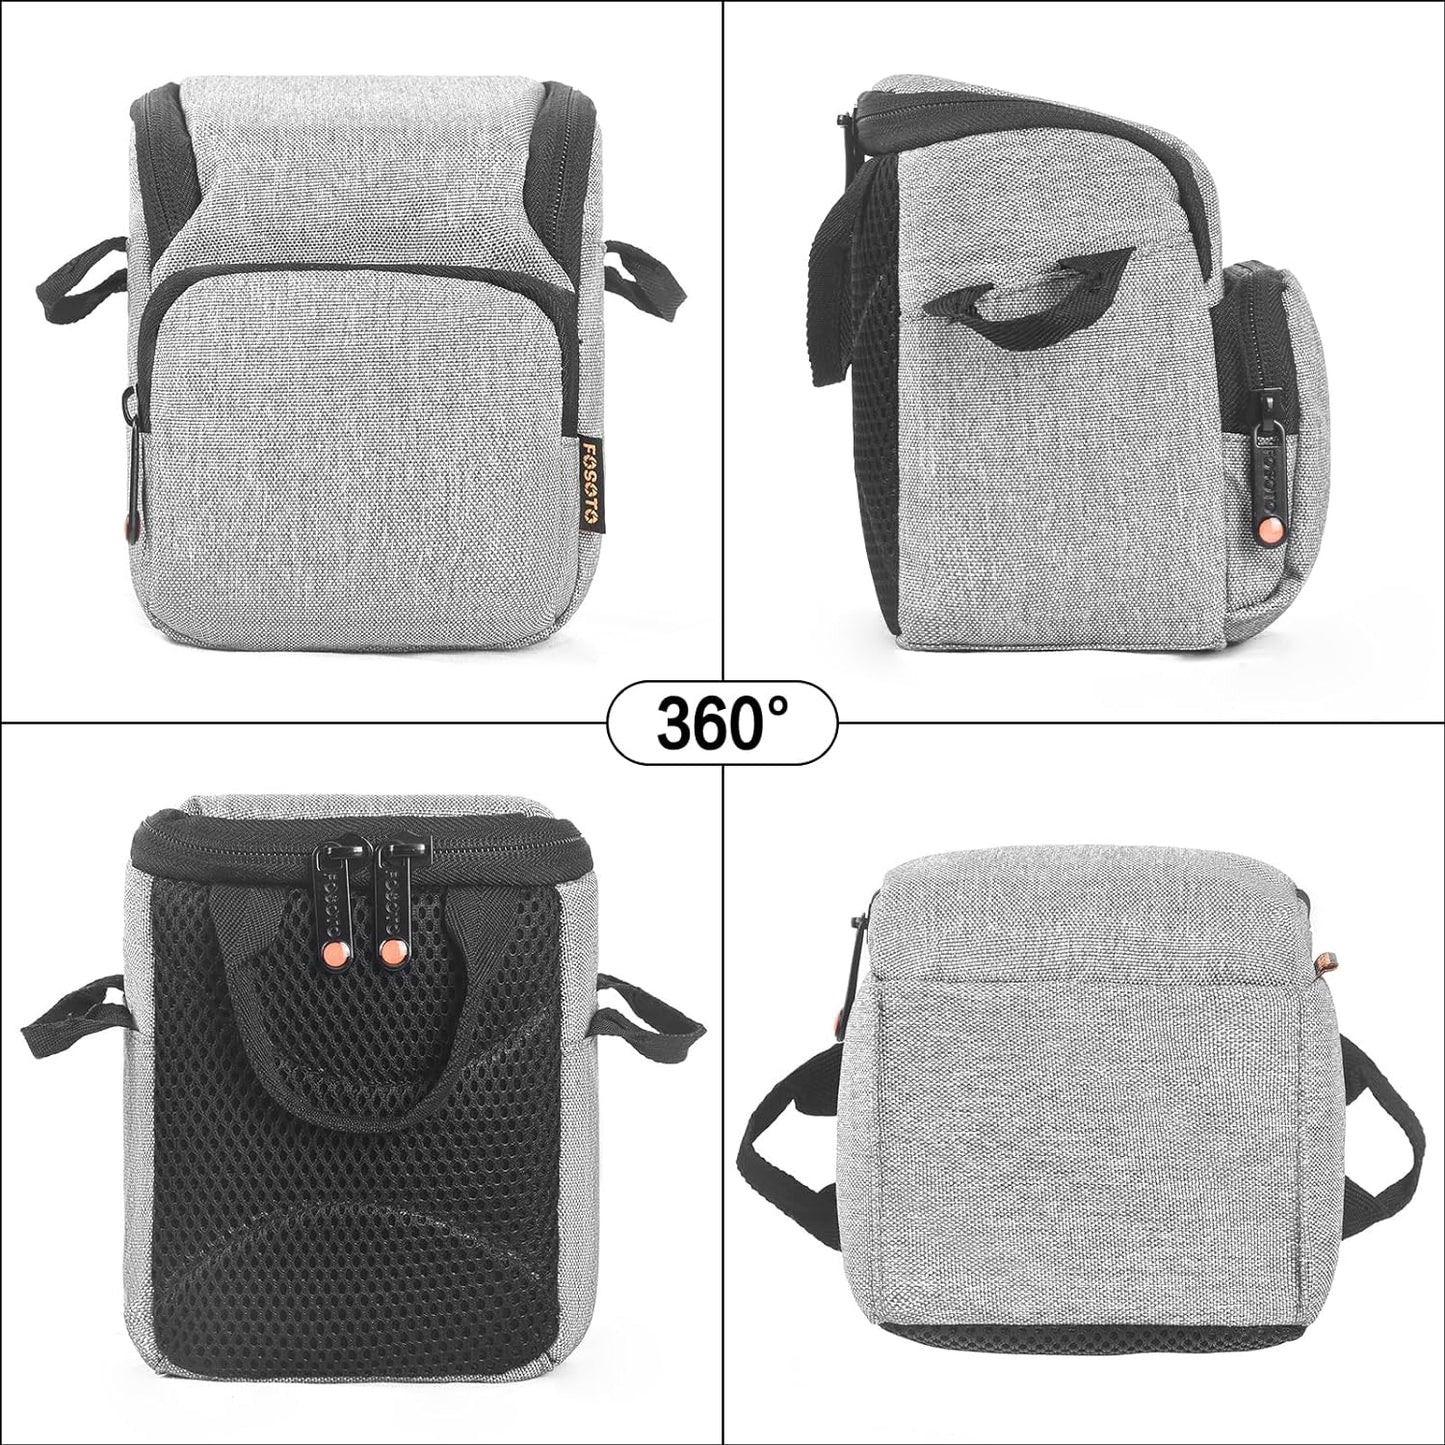 FOSOTO Camera Case Bag Compatible for Nikon L340 L330 B500 L840,Canon SX420 SX720 SX620 G7X, Sony A6000 A6300 a5100 NEX-6 W830 RX100 RX0M2,Panasonic GX85 ZS60 Long Zoom or Compact Syste